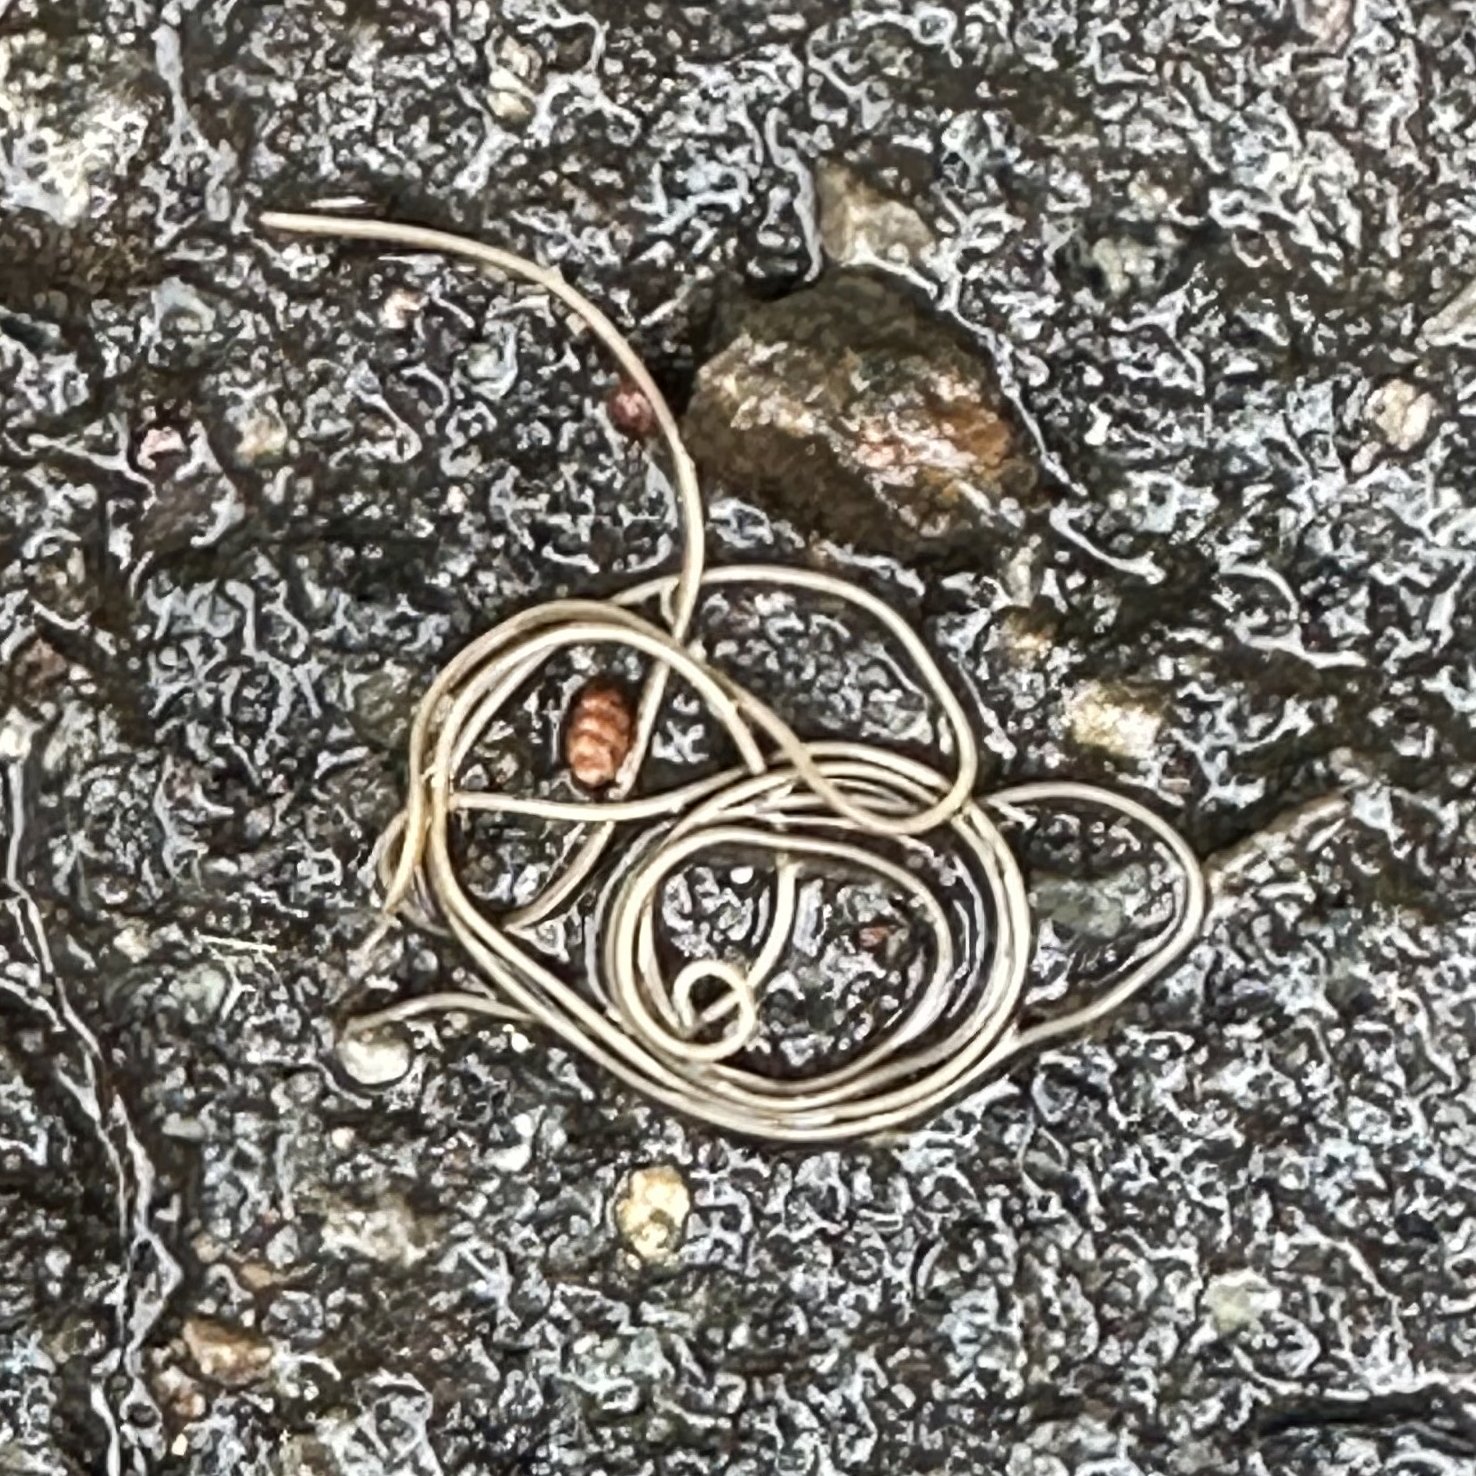 Wildlife Wednesday! Here on Wildlife Wednesday we're more than just a pretty face...This fascinating creature is a Gordian Worm (also called a Horsehair Worm), and they seem to be everywhere here at the moment. Emerging on rainy days, these spaghetti